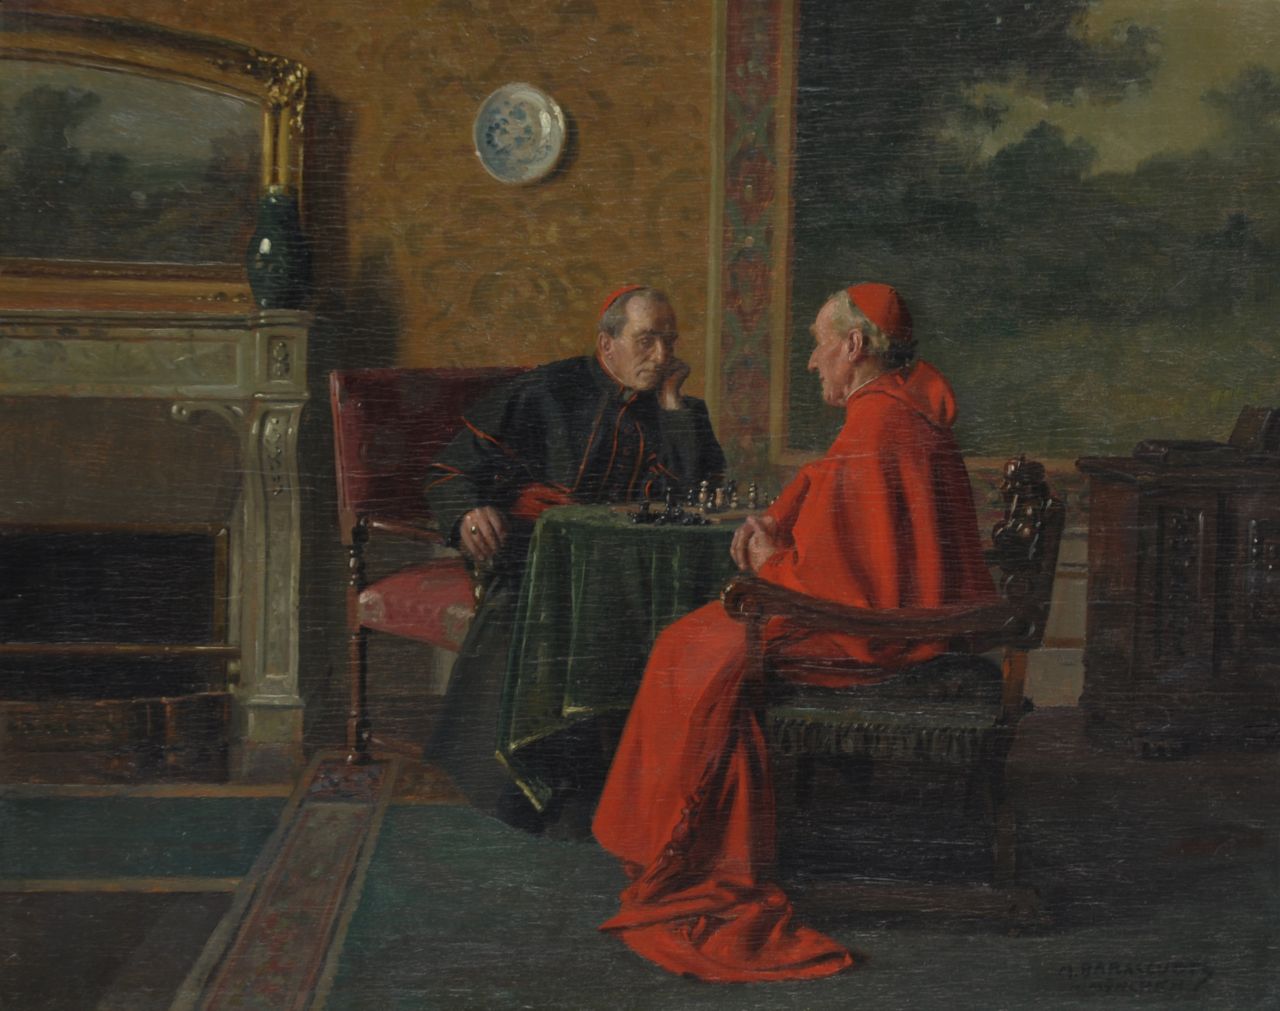 Barascudts M.  | Max Barascudts, Chess playing cardinals, Öl auf Holz 40,0 x 50,0 cm, signed l.r.